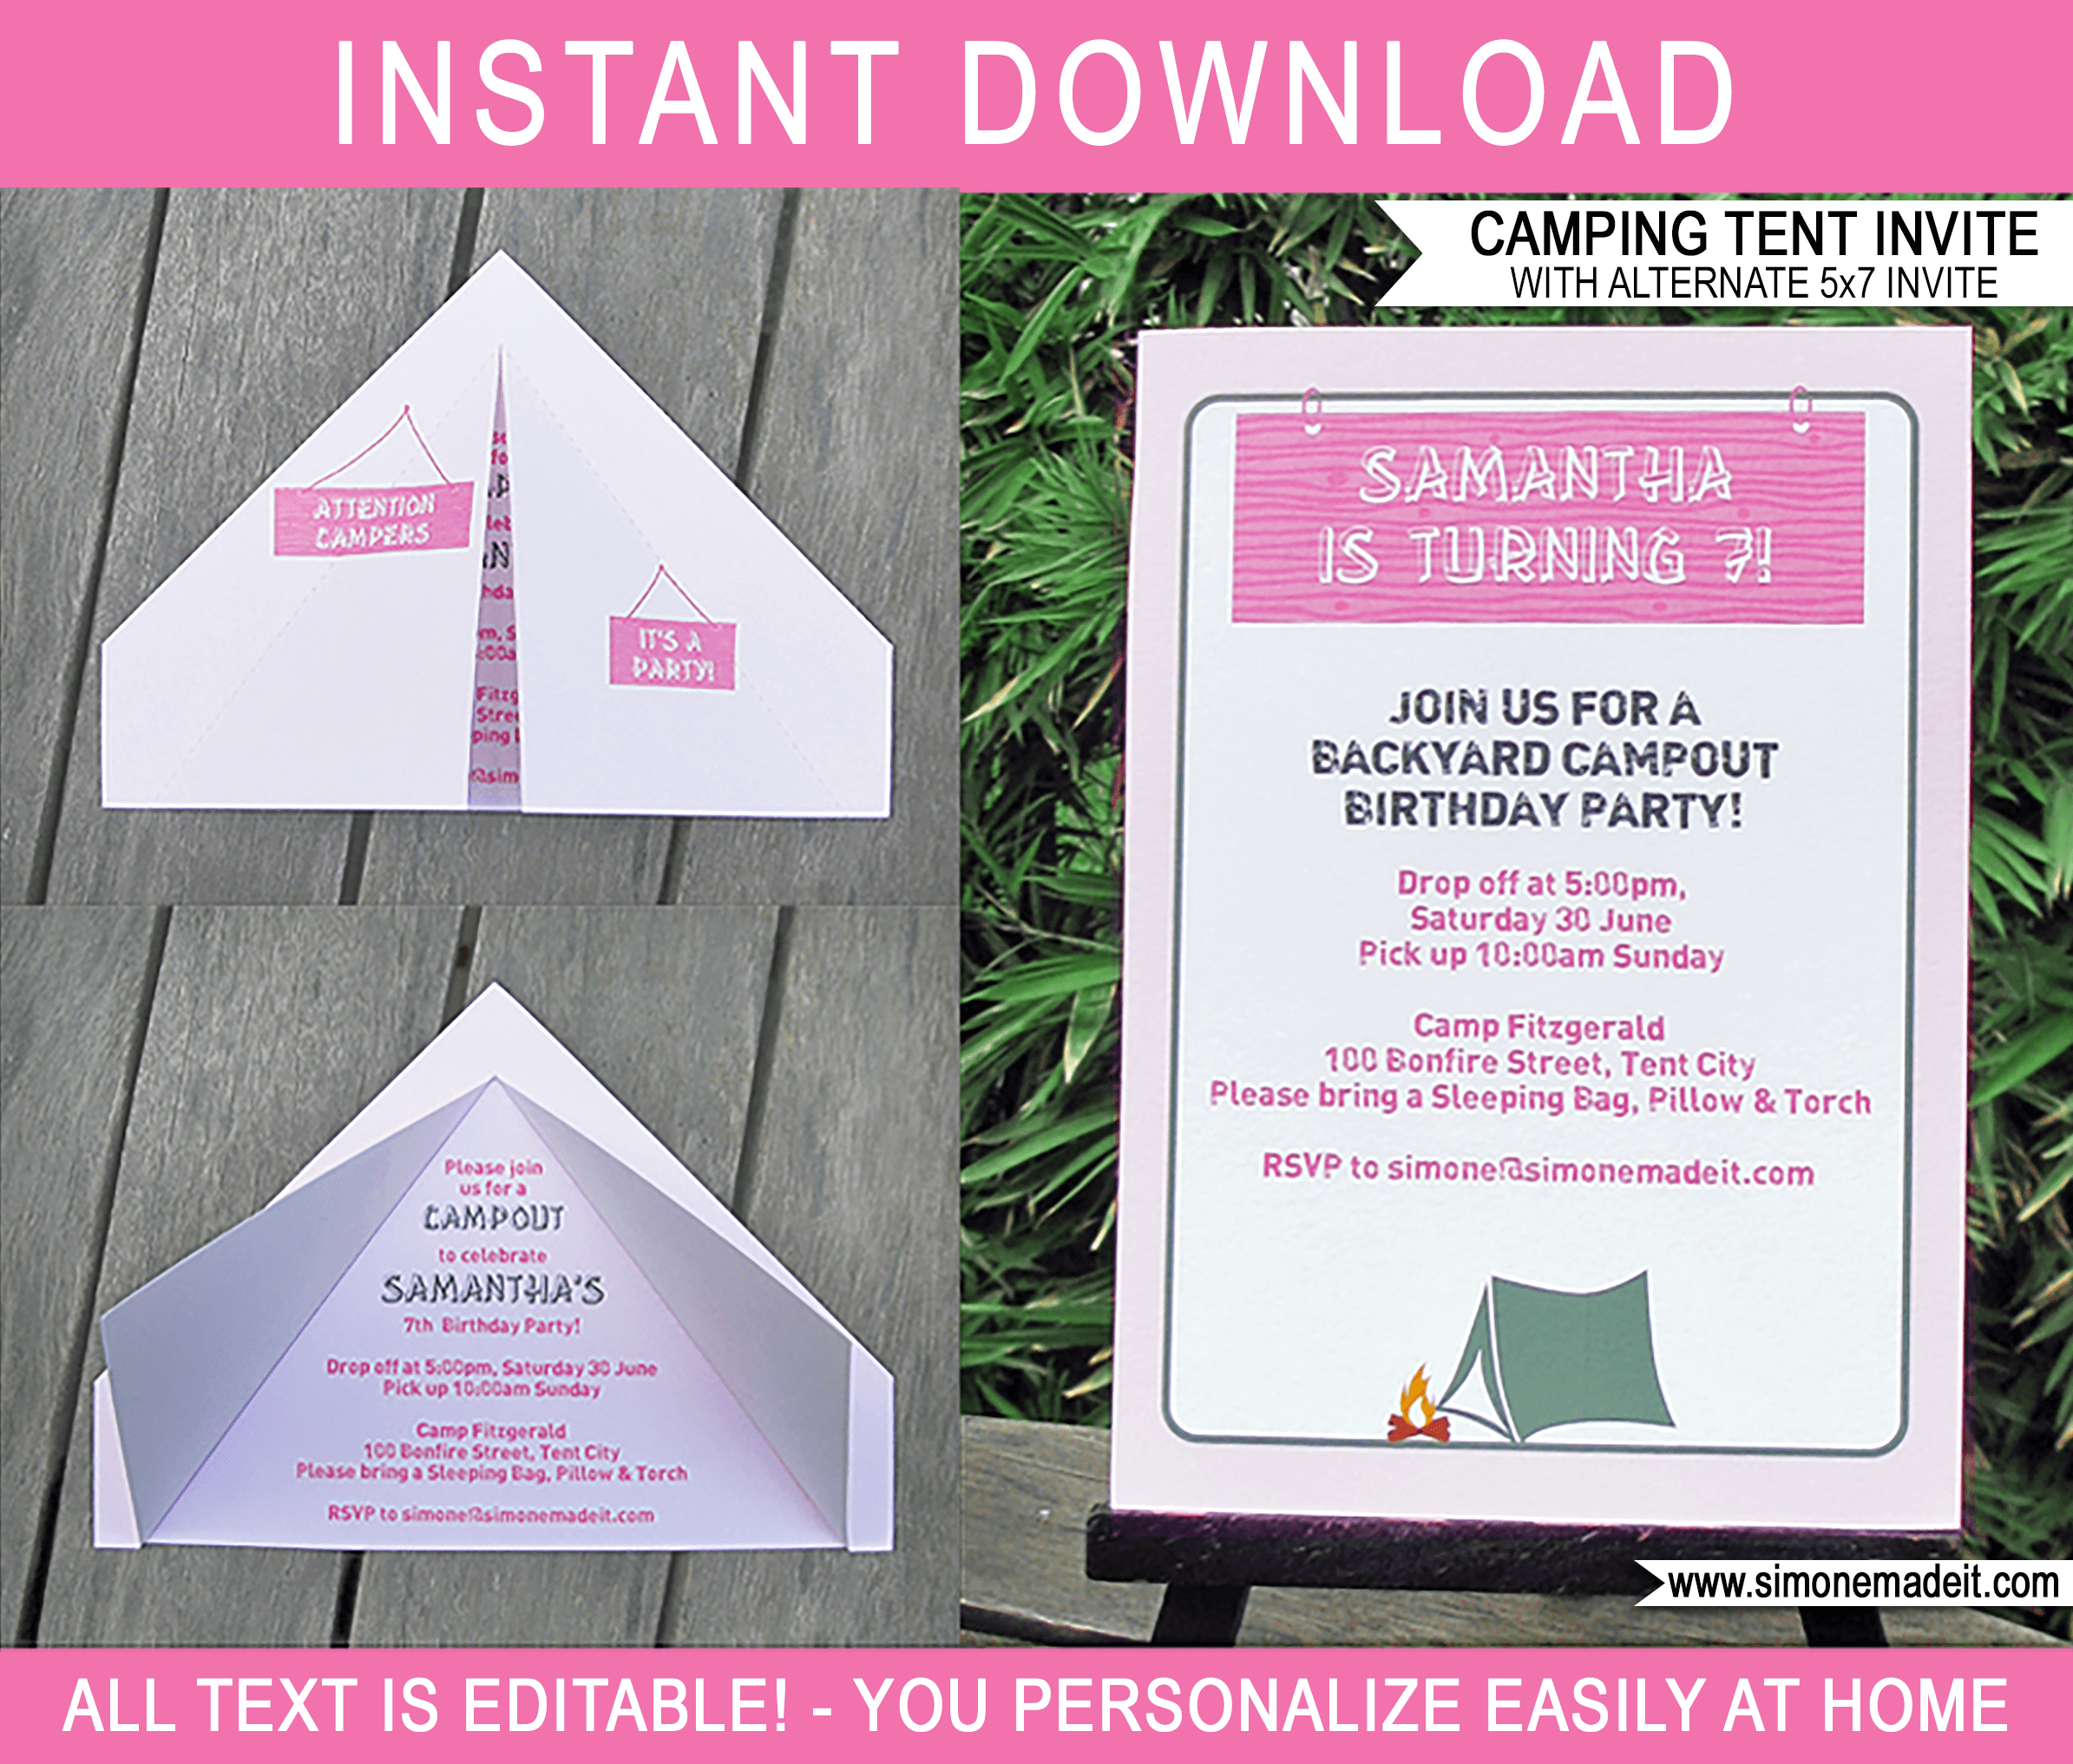 Girls Camping Tent Invitations template | Pink Campout Theme Invite | Glamping | Birthday Party | Editable DIY Theme Template | INSTANT DOWNLOAD $7.50 via SIMONEmadeit.com